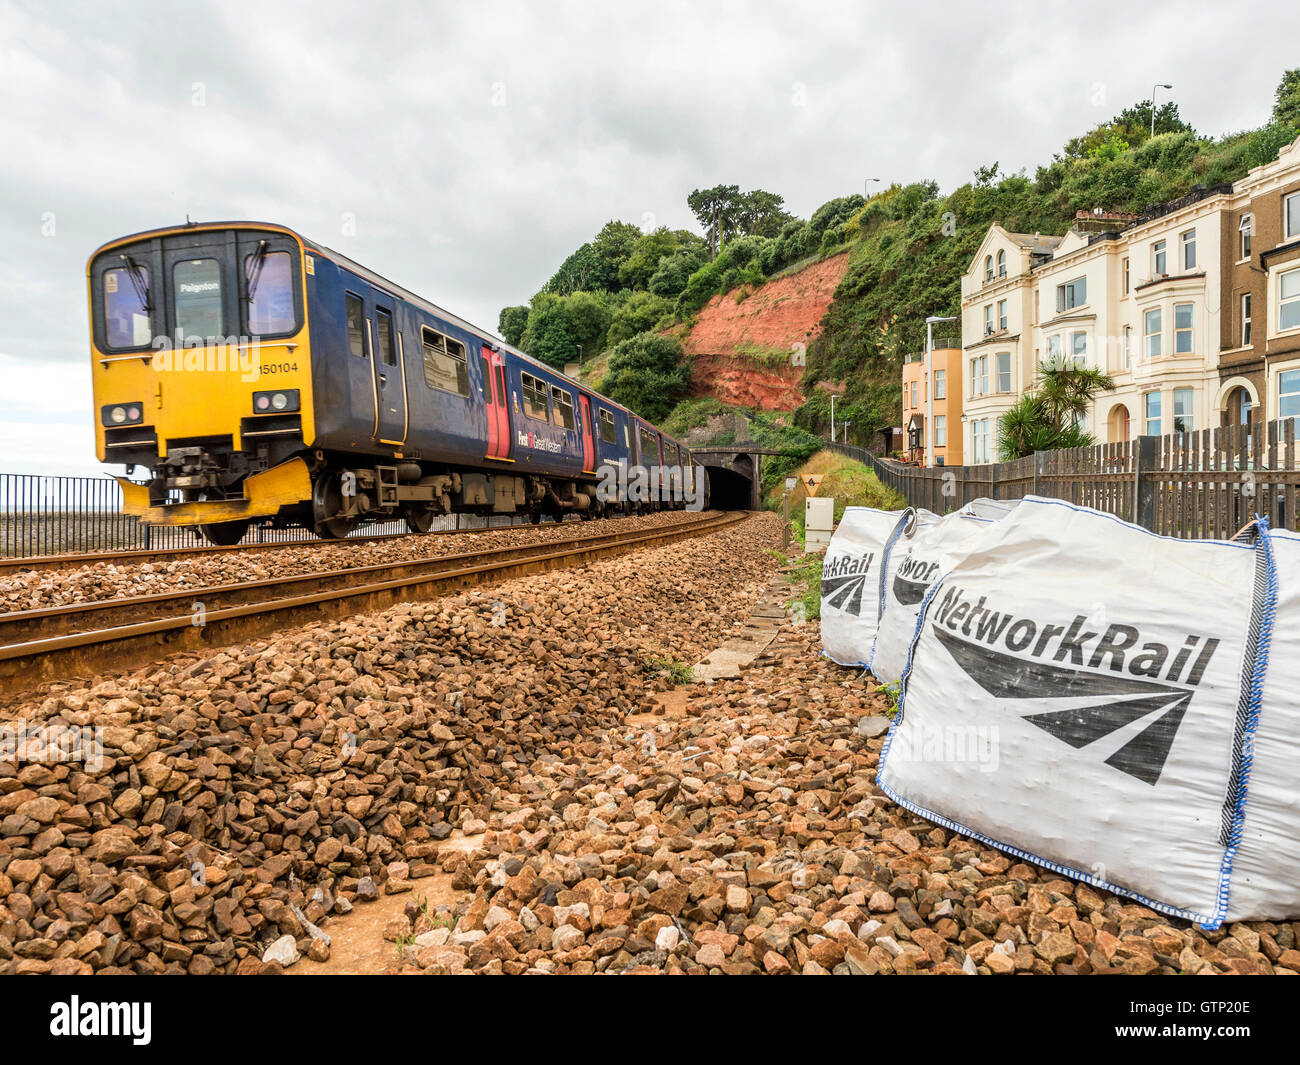 Landscape depicting the picturesque First Great Western Riviera railway line at Dawlish, with approaching train. Stock Photo